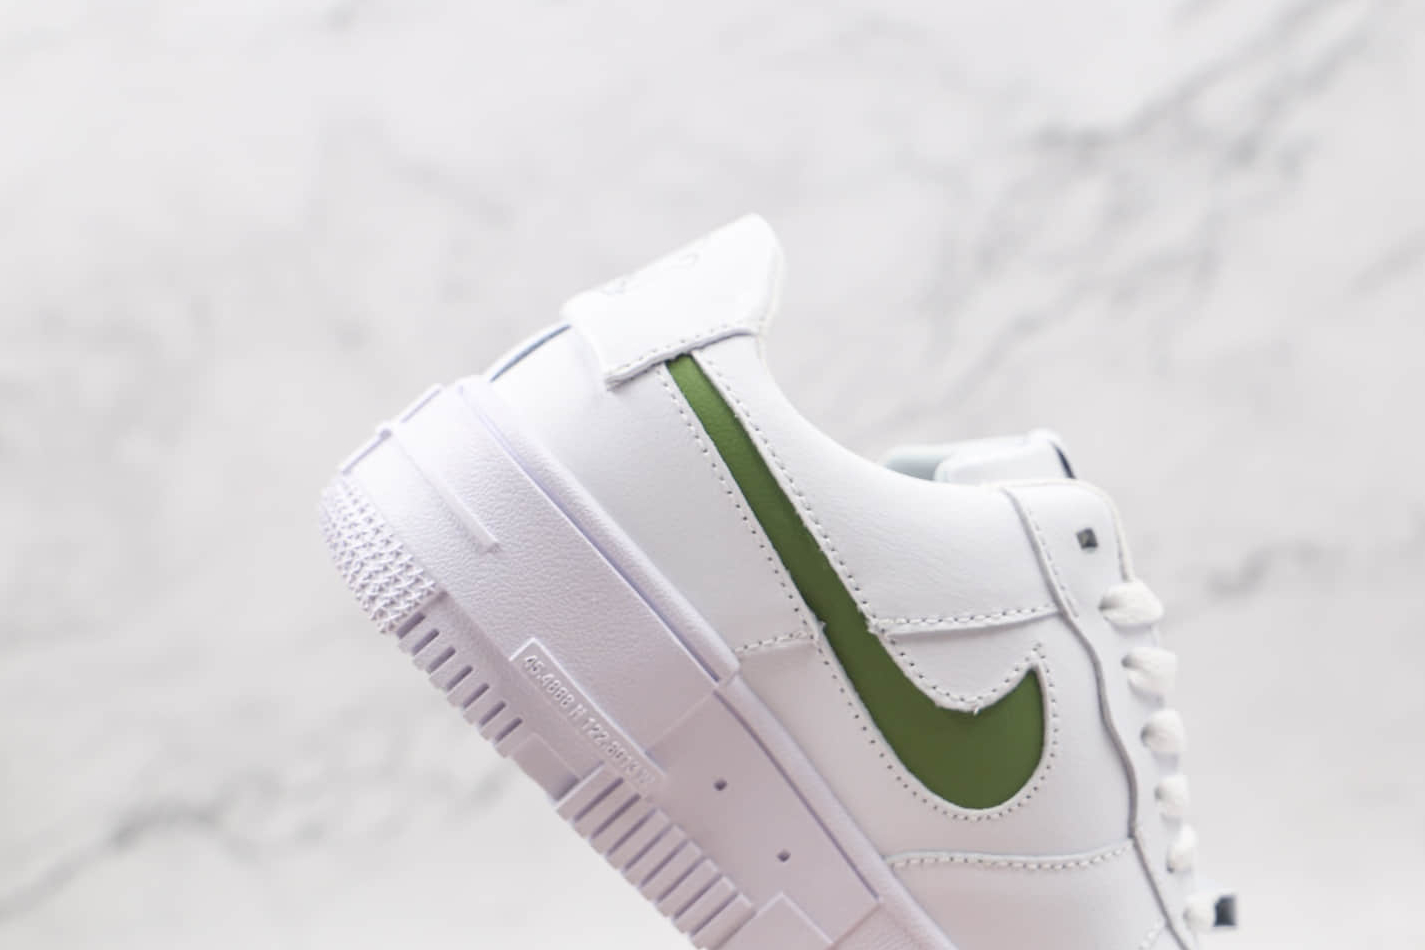 Nike Air Force 1 Pixel White Green Shoes CK6649-005 - Stylish and Trendy Footwear